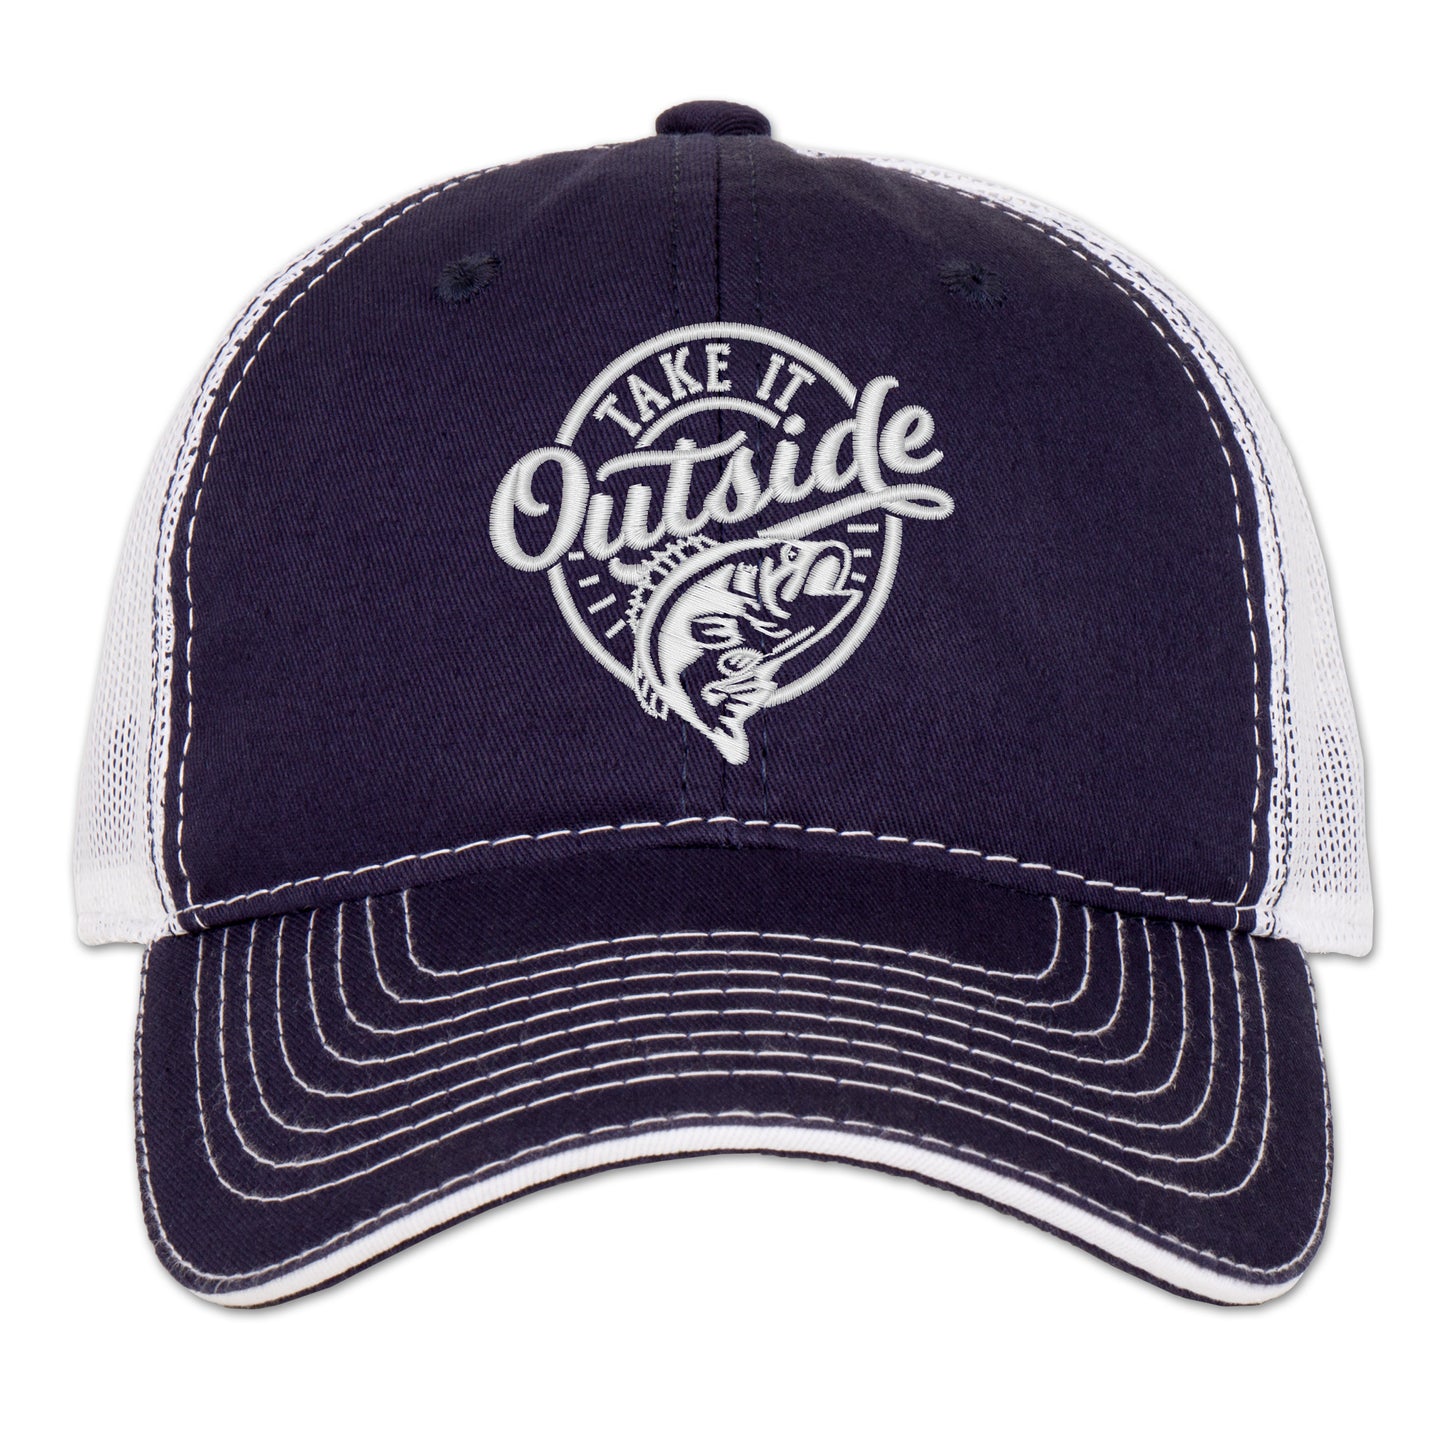 Take it Outside: Fish Embroidered Trucker Hat